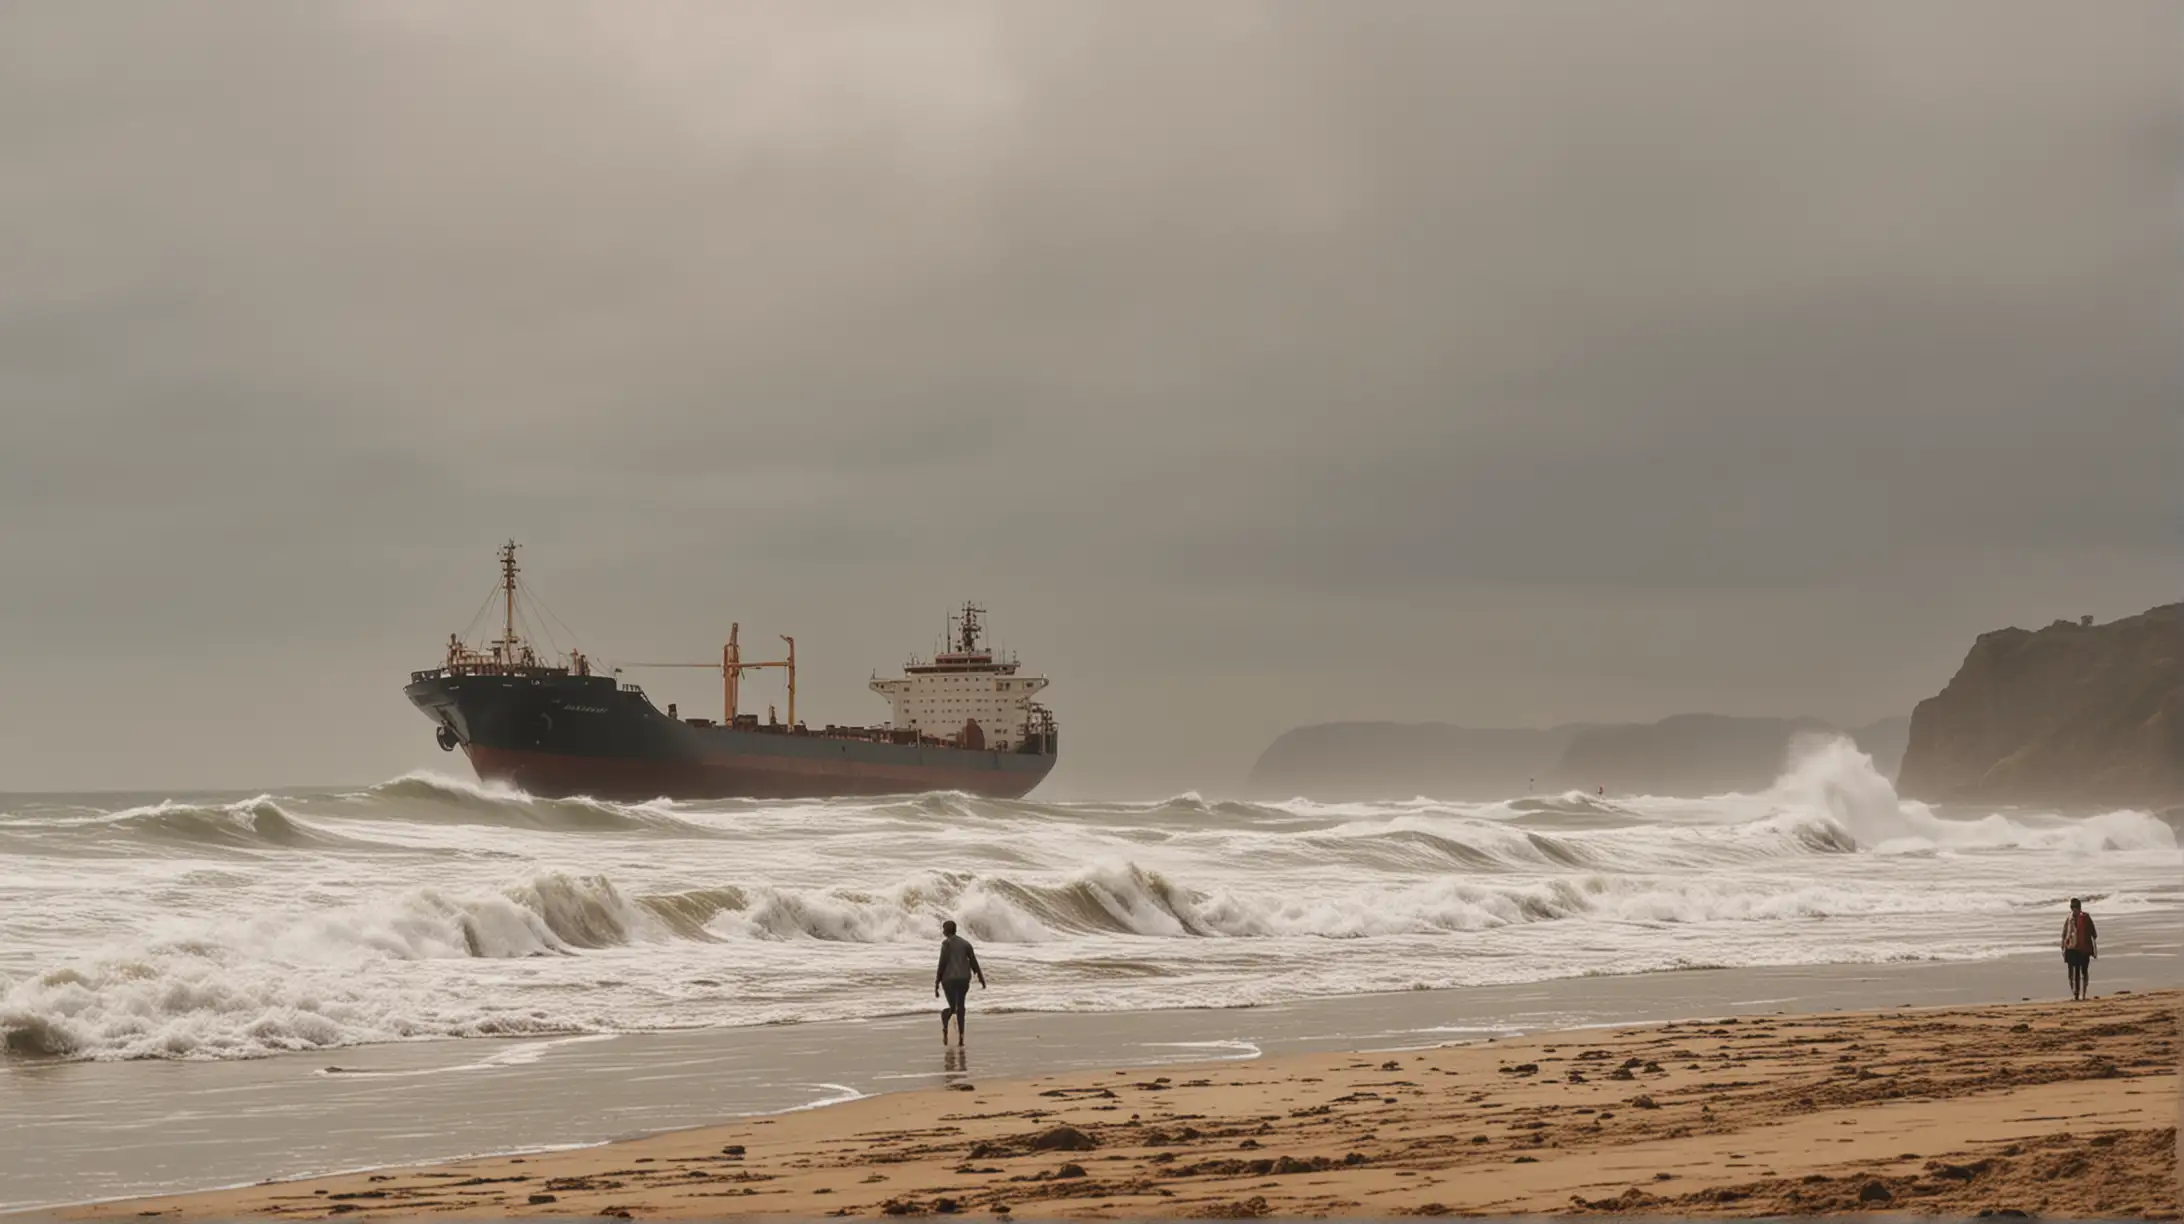  people walking on sand beach and big waves  distance view landscape stranded  cargoship